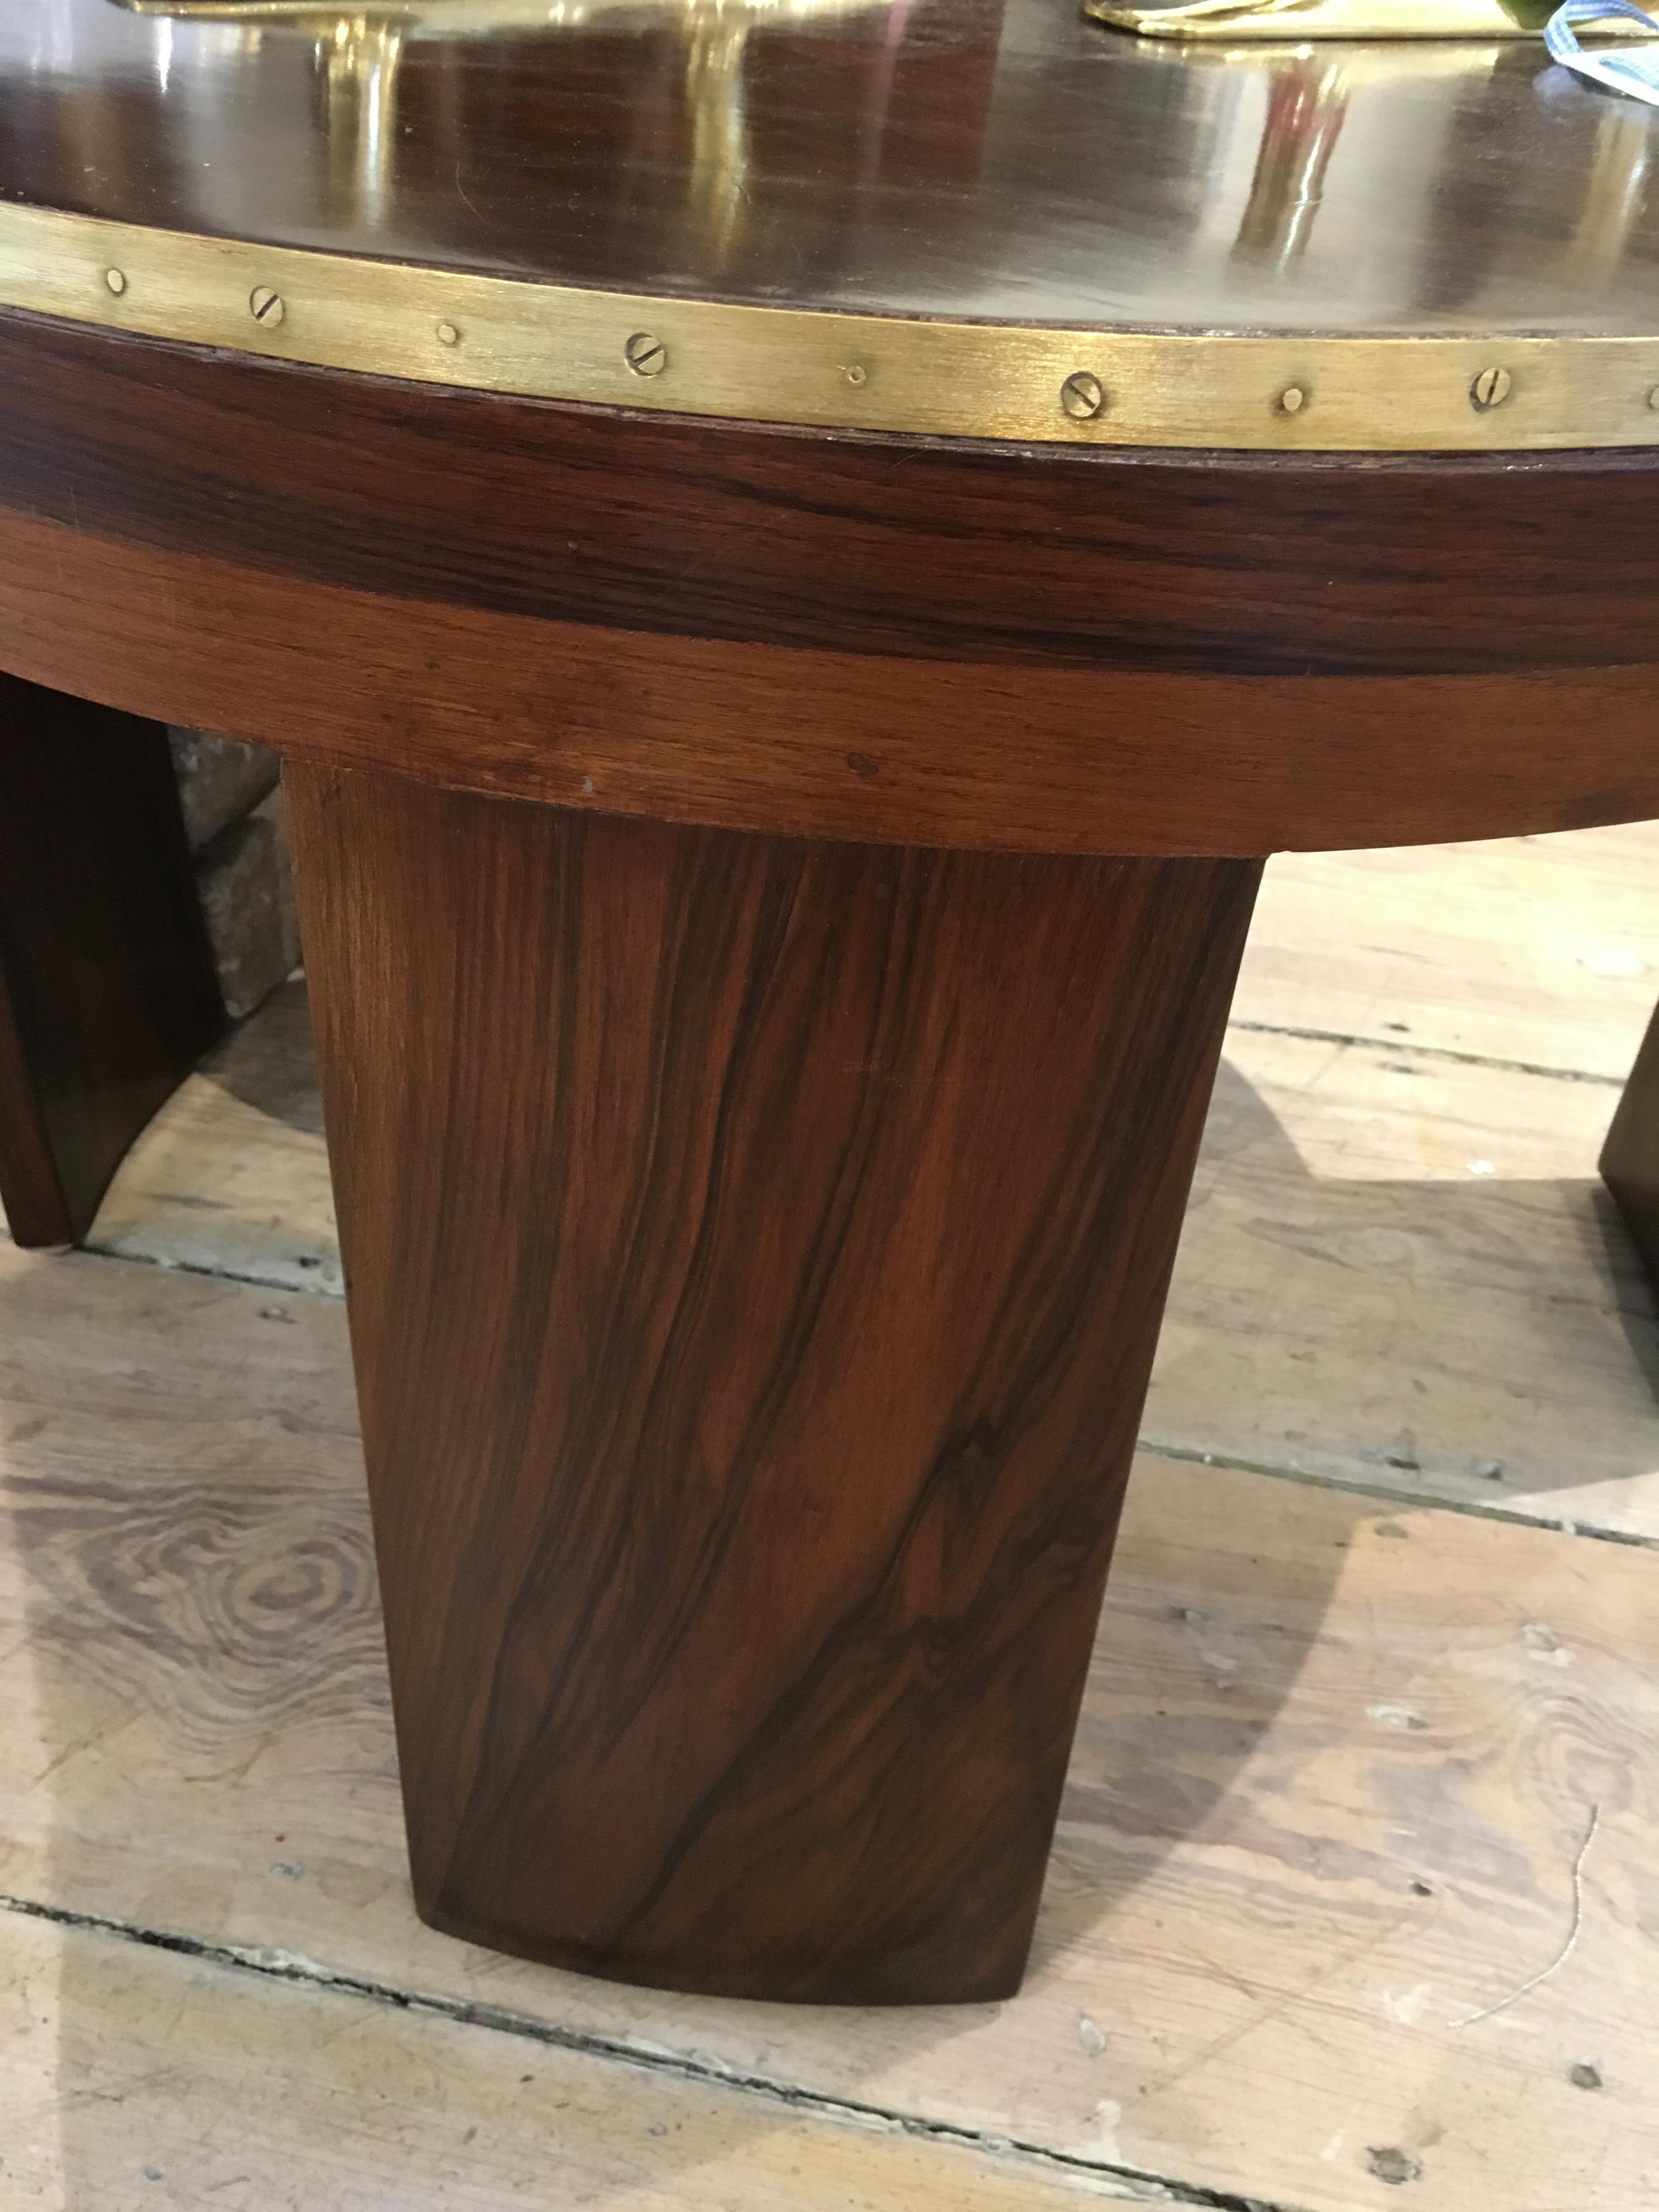 20th Century Mid-Century Modern Teak Wood Coffee or Drinks Table with Brass Border